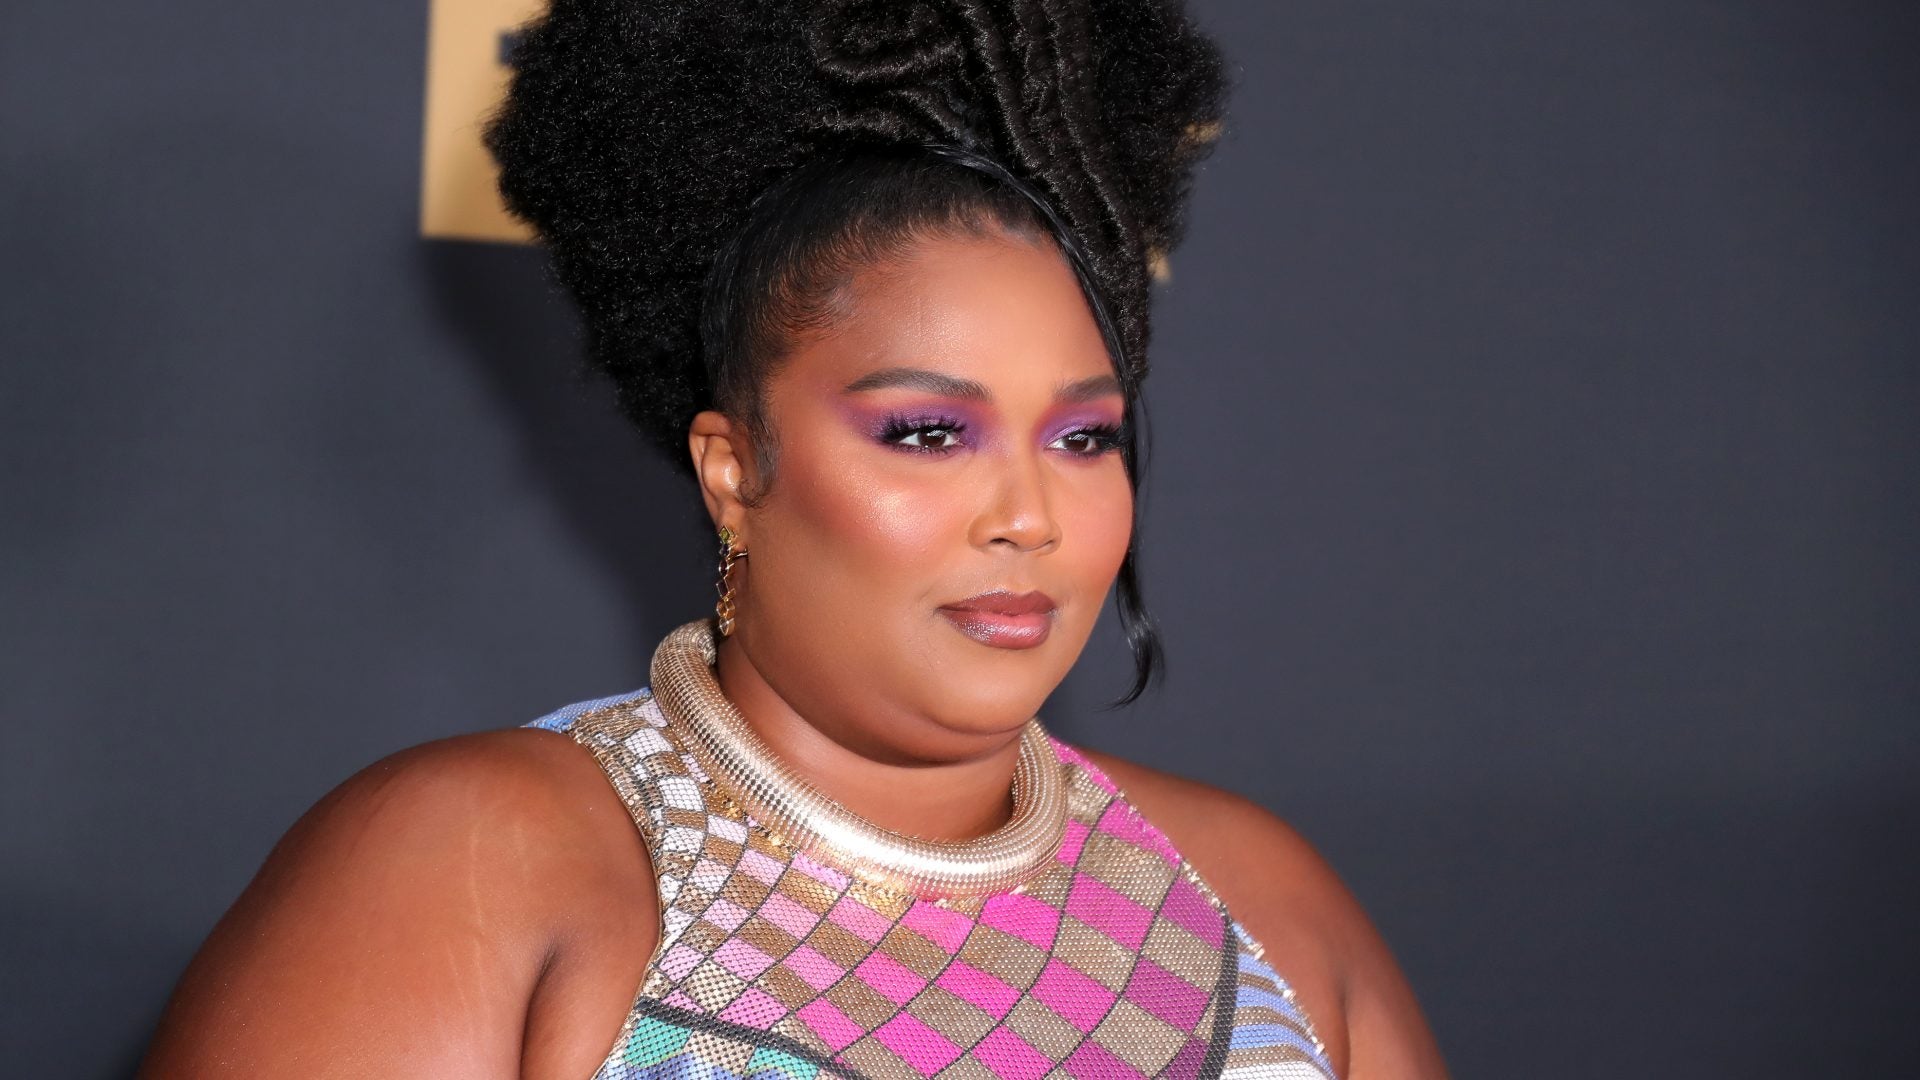 Lizzo Is Finally Setting Boundaries: 'There Is Power In The Word No When You Are Saying Yes To Yourself'